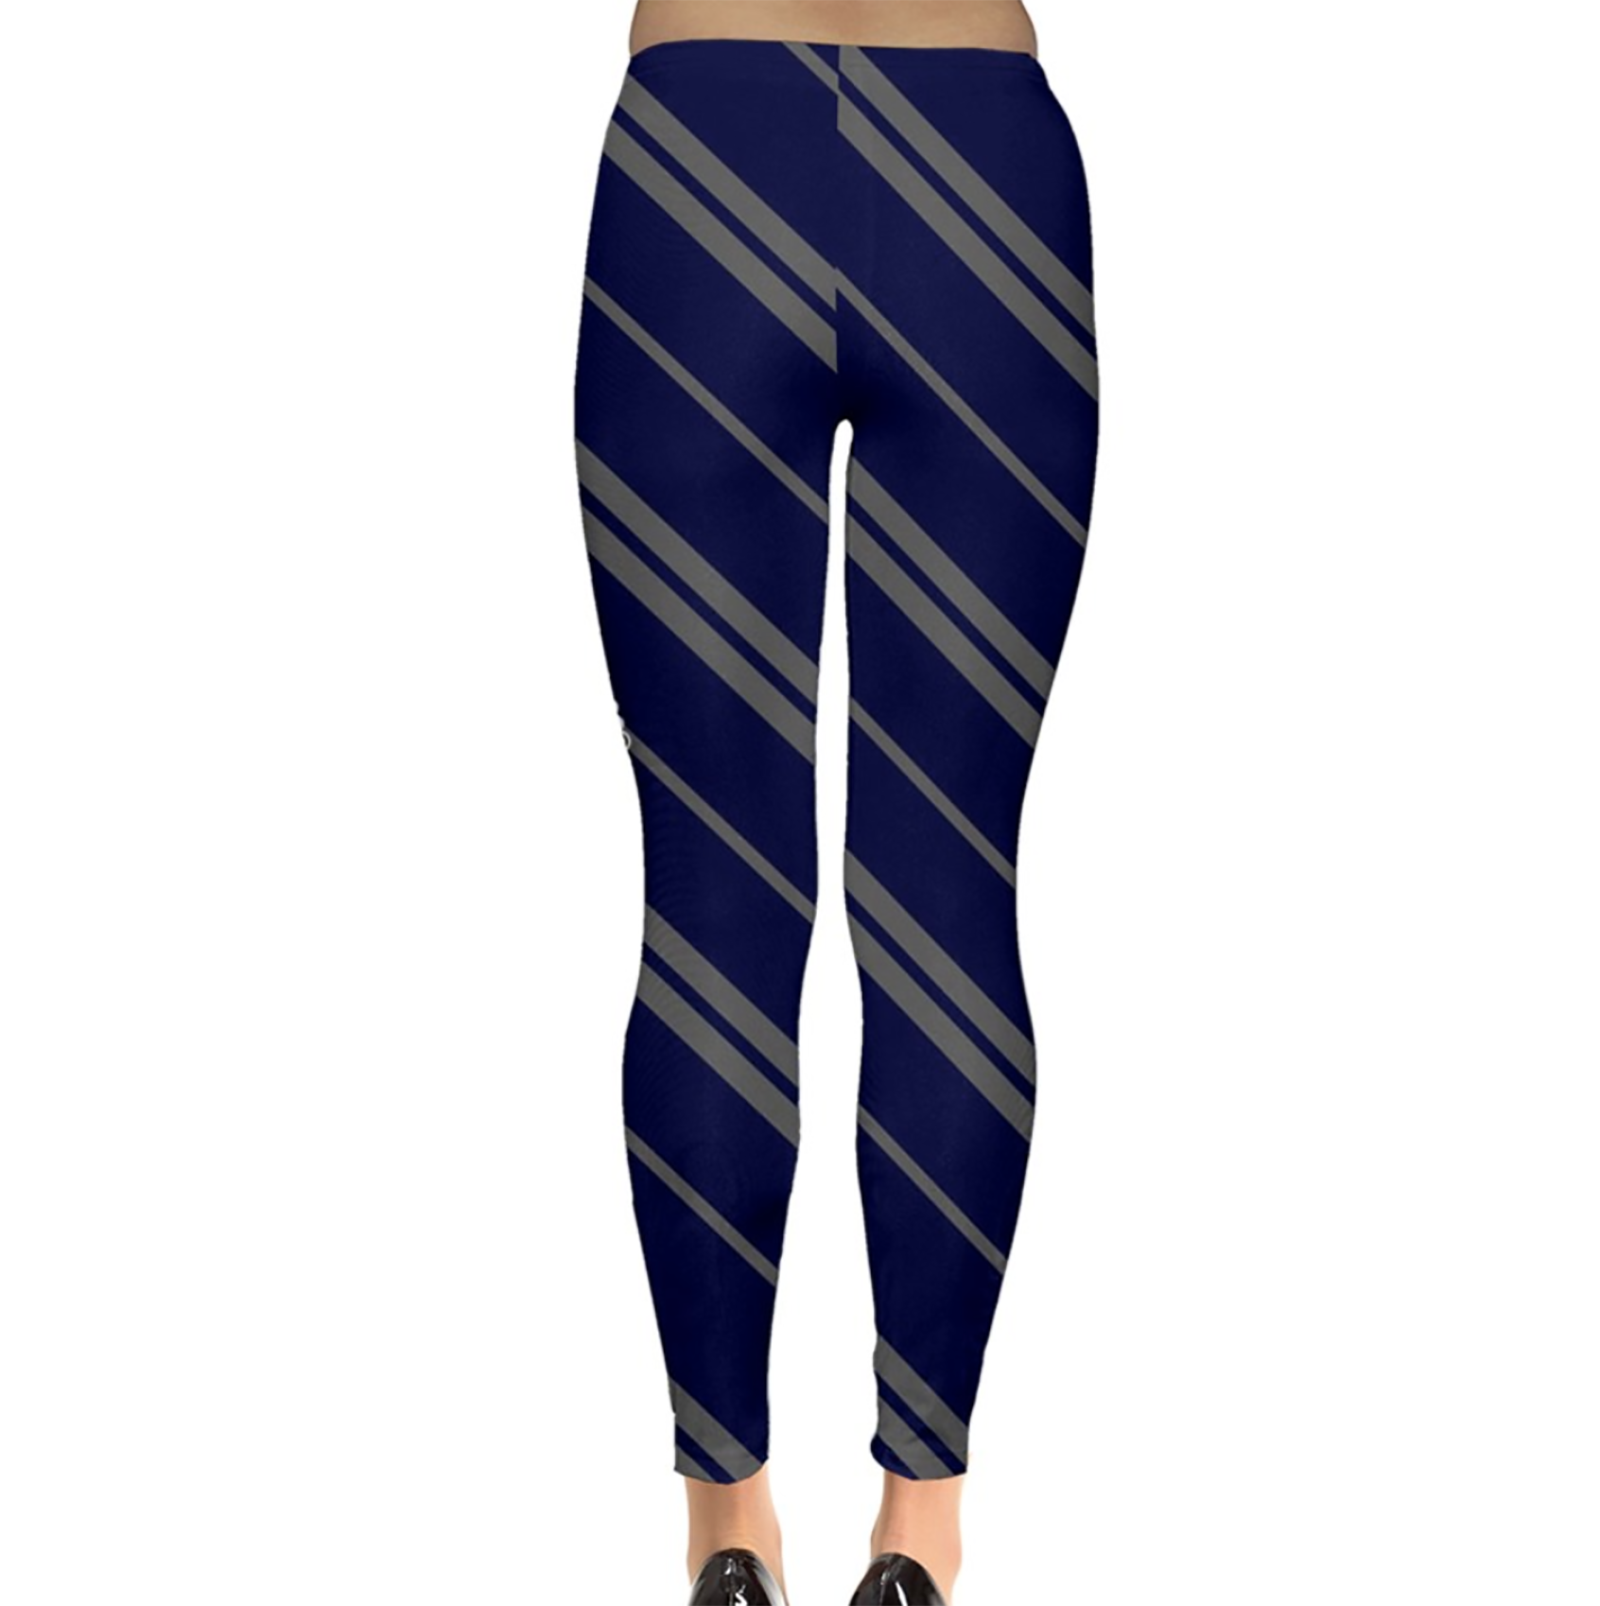 Blue & Gray Striped Leggings - Inspired by Ravenclaw